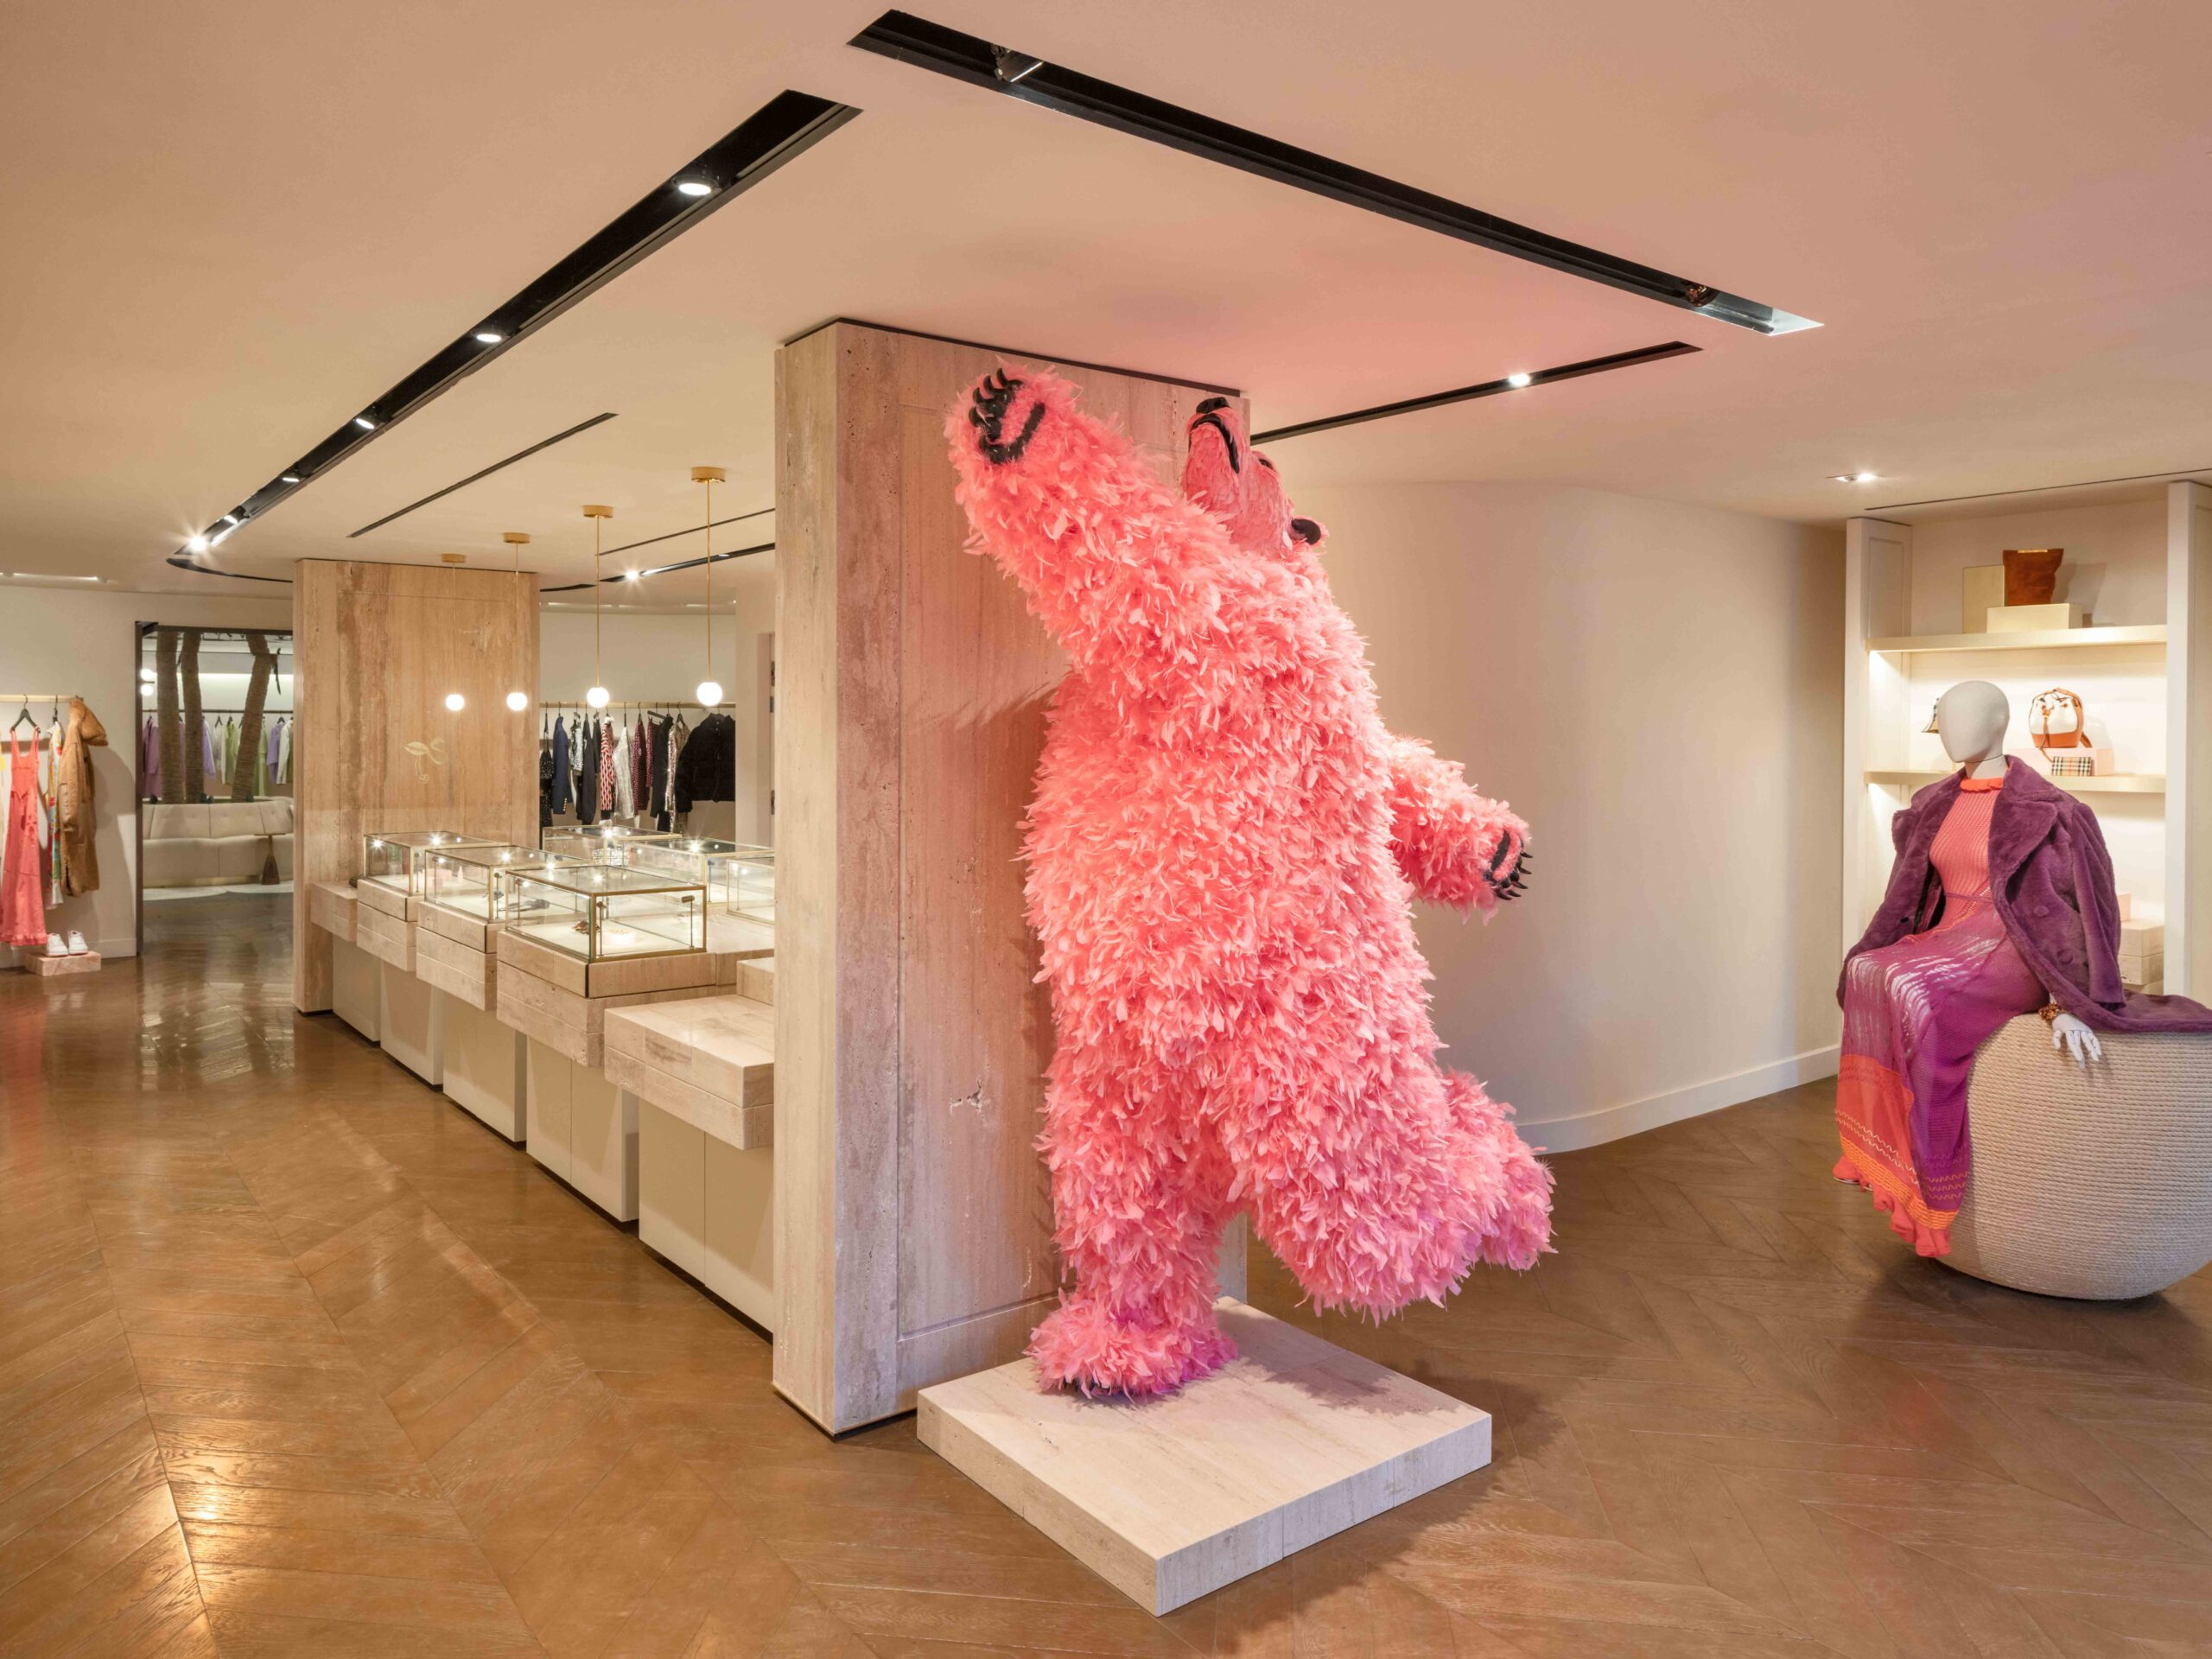 Alexander McQueen Opens 1st Canadian Storefront at Toronto's Yorkdale  Shopping Centre [Photos]